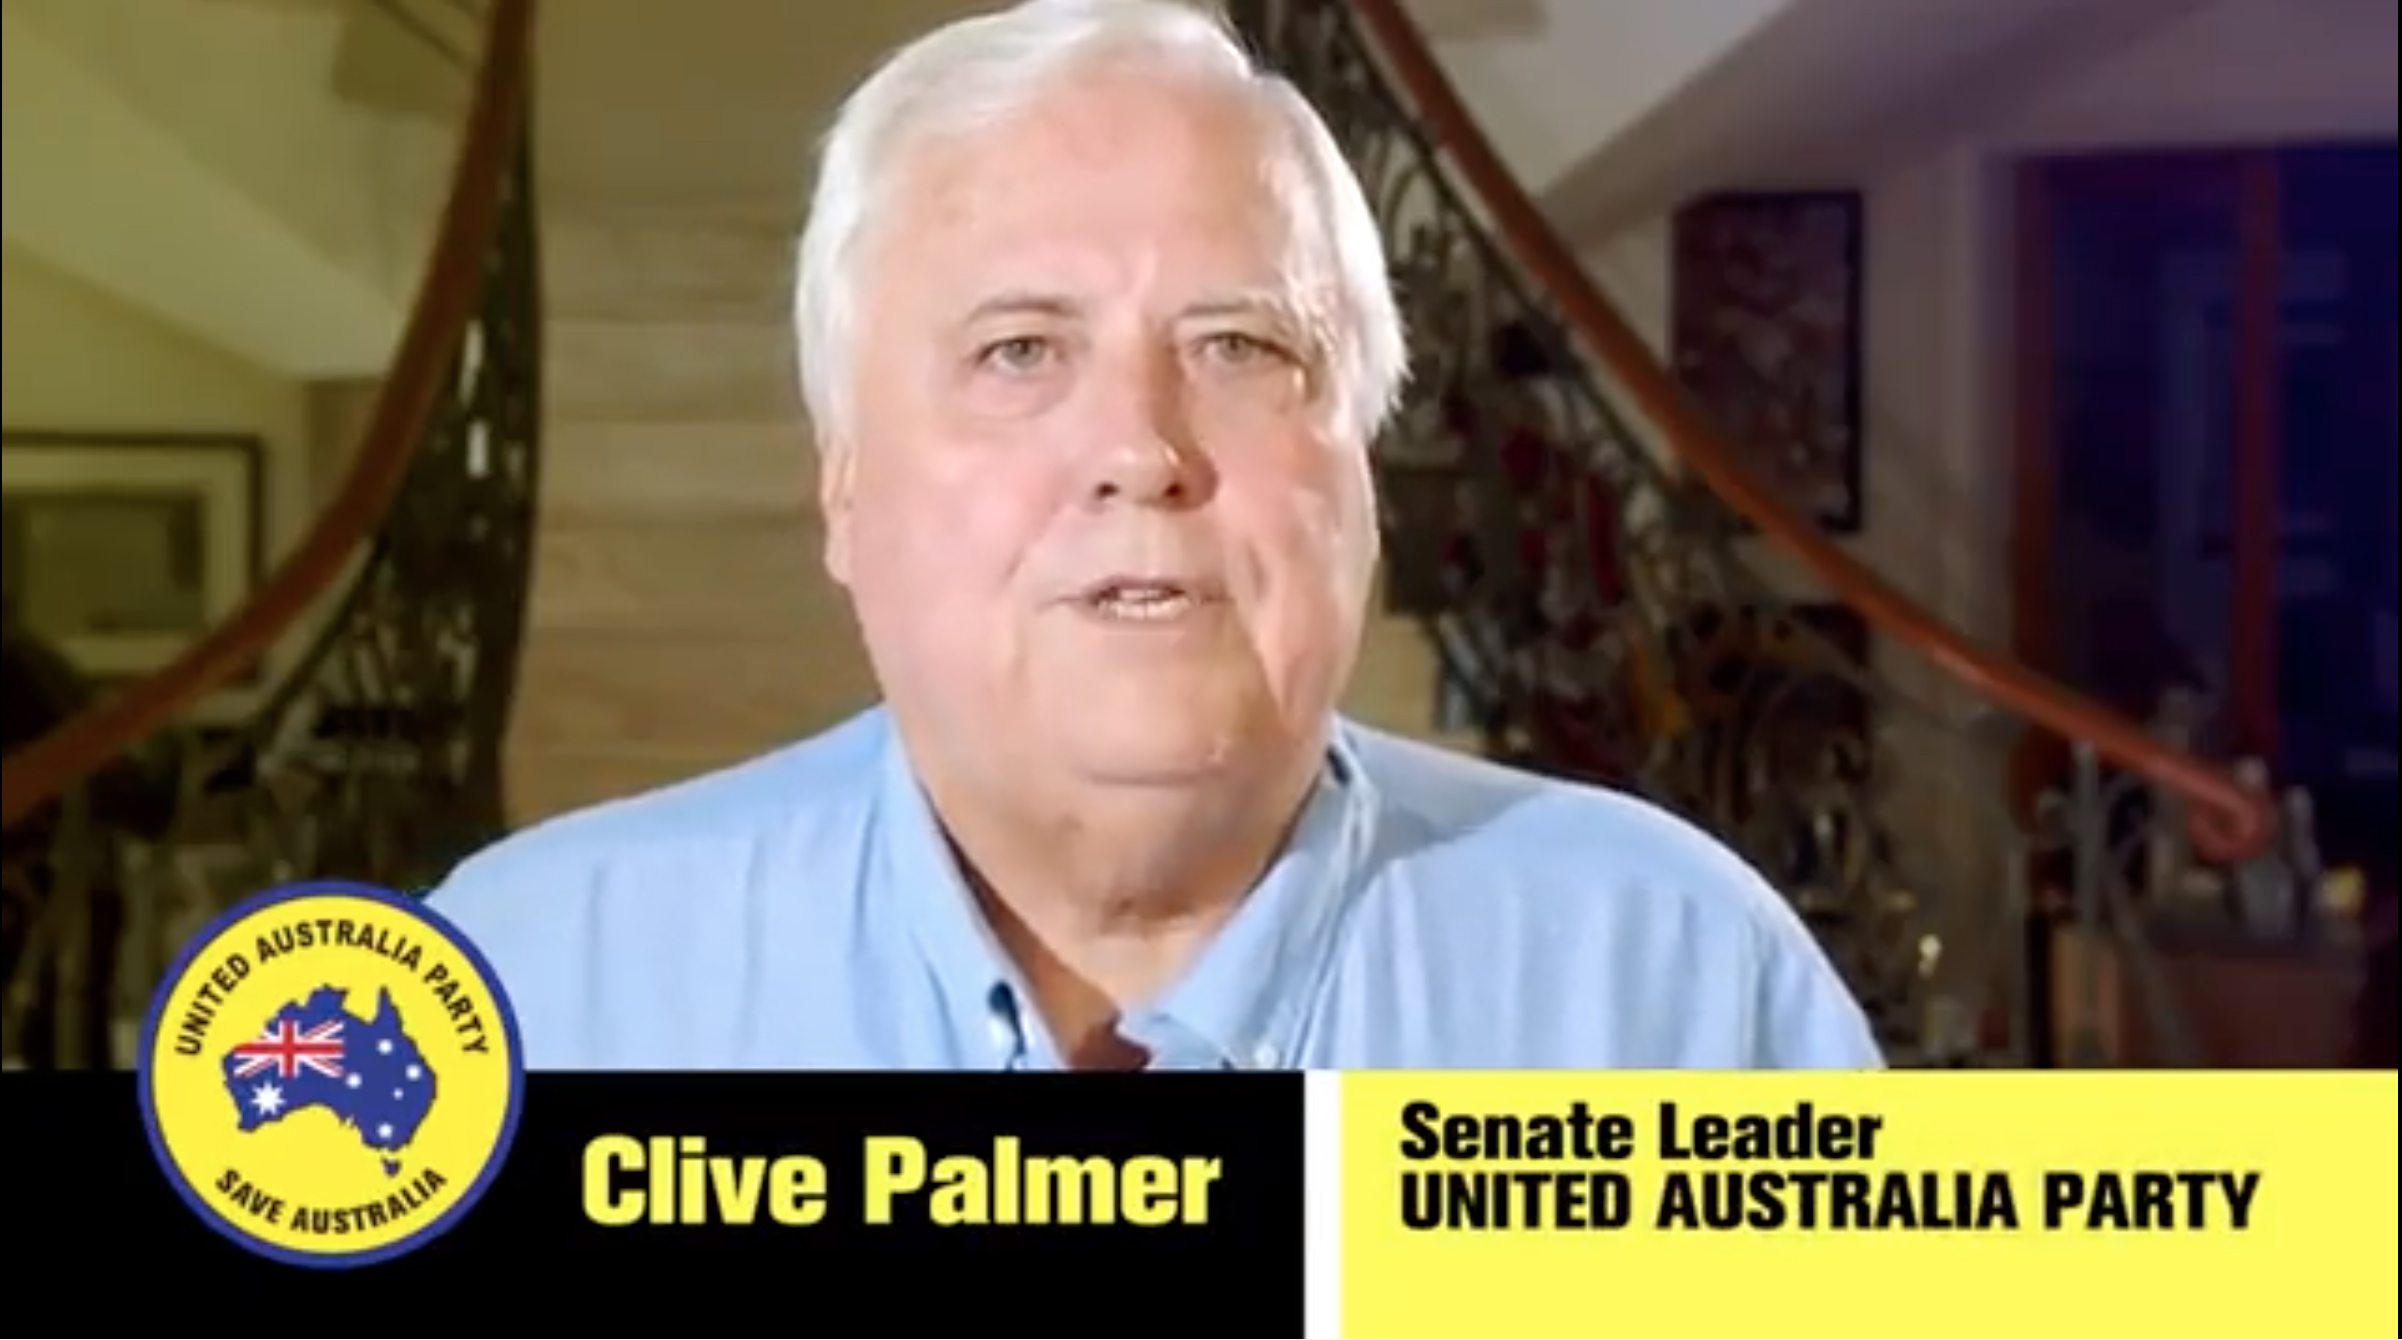 A screen shot of Clive Palmer in an online video ad for the United Australia Party